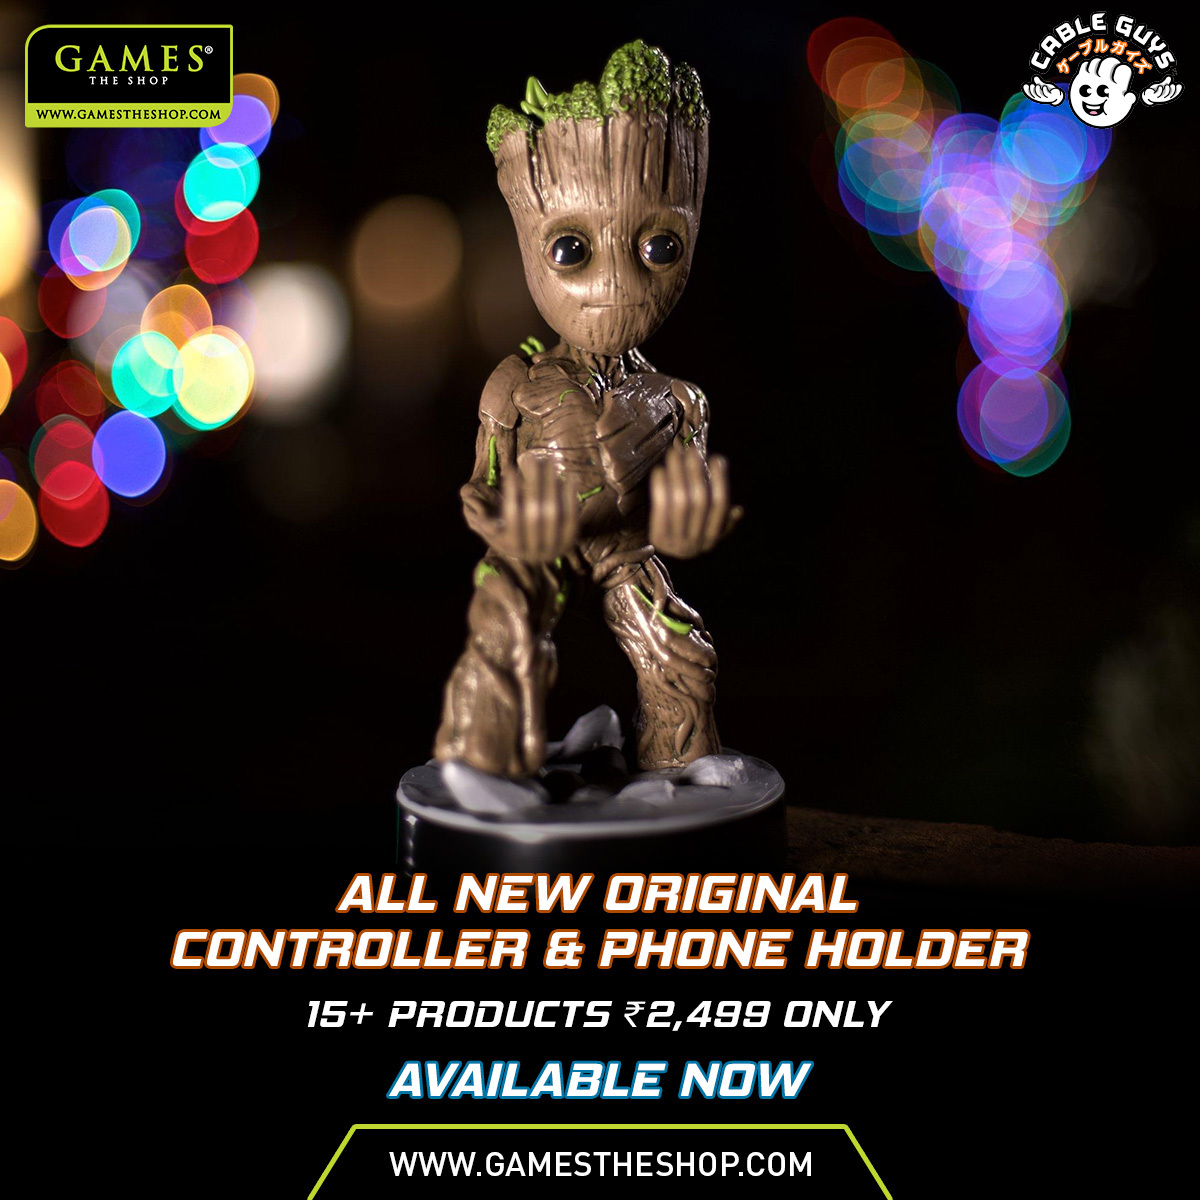 One of the cutest in the collection Guardians of The Galaxy: Toddler Groot Original Controller and Phone Holder. 

Available from gamestheshop.com 

#GamesTheShop #Marvel #Groot #ToddlerGroot #Controllerholder #Phoneholder #Gamingmerchandise #Gamers #Gamingsetup